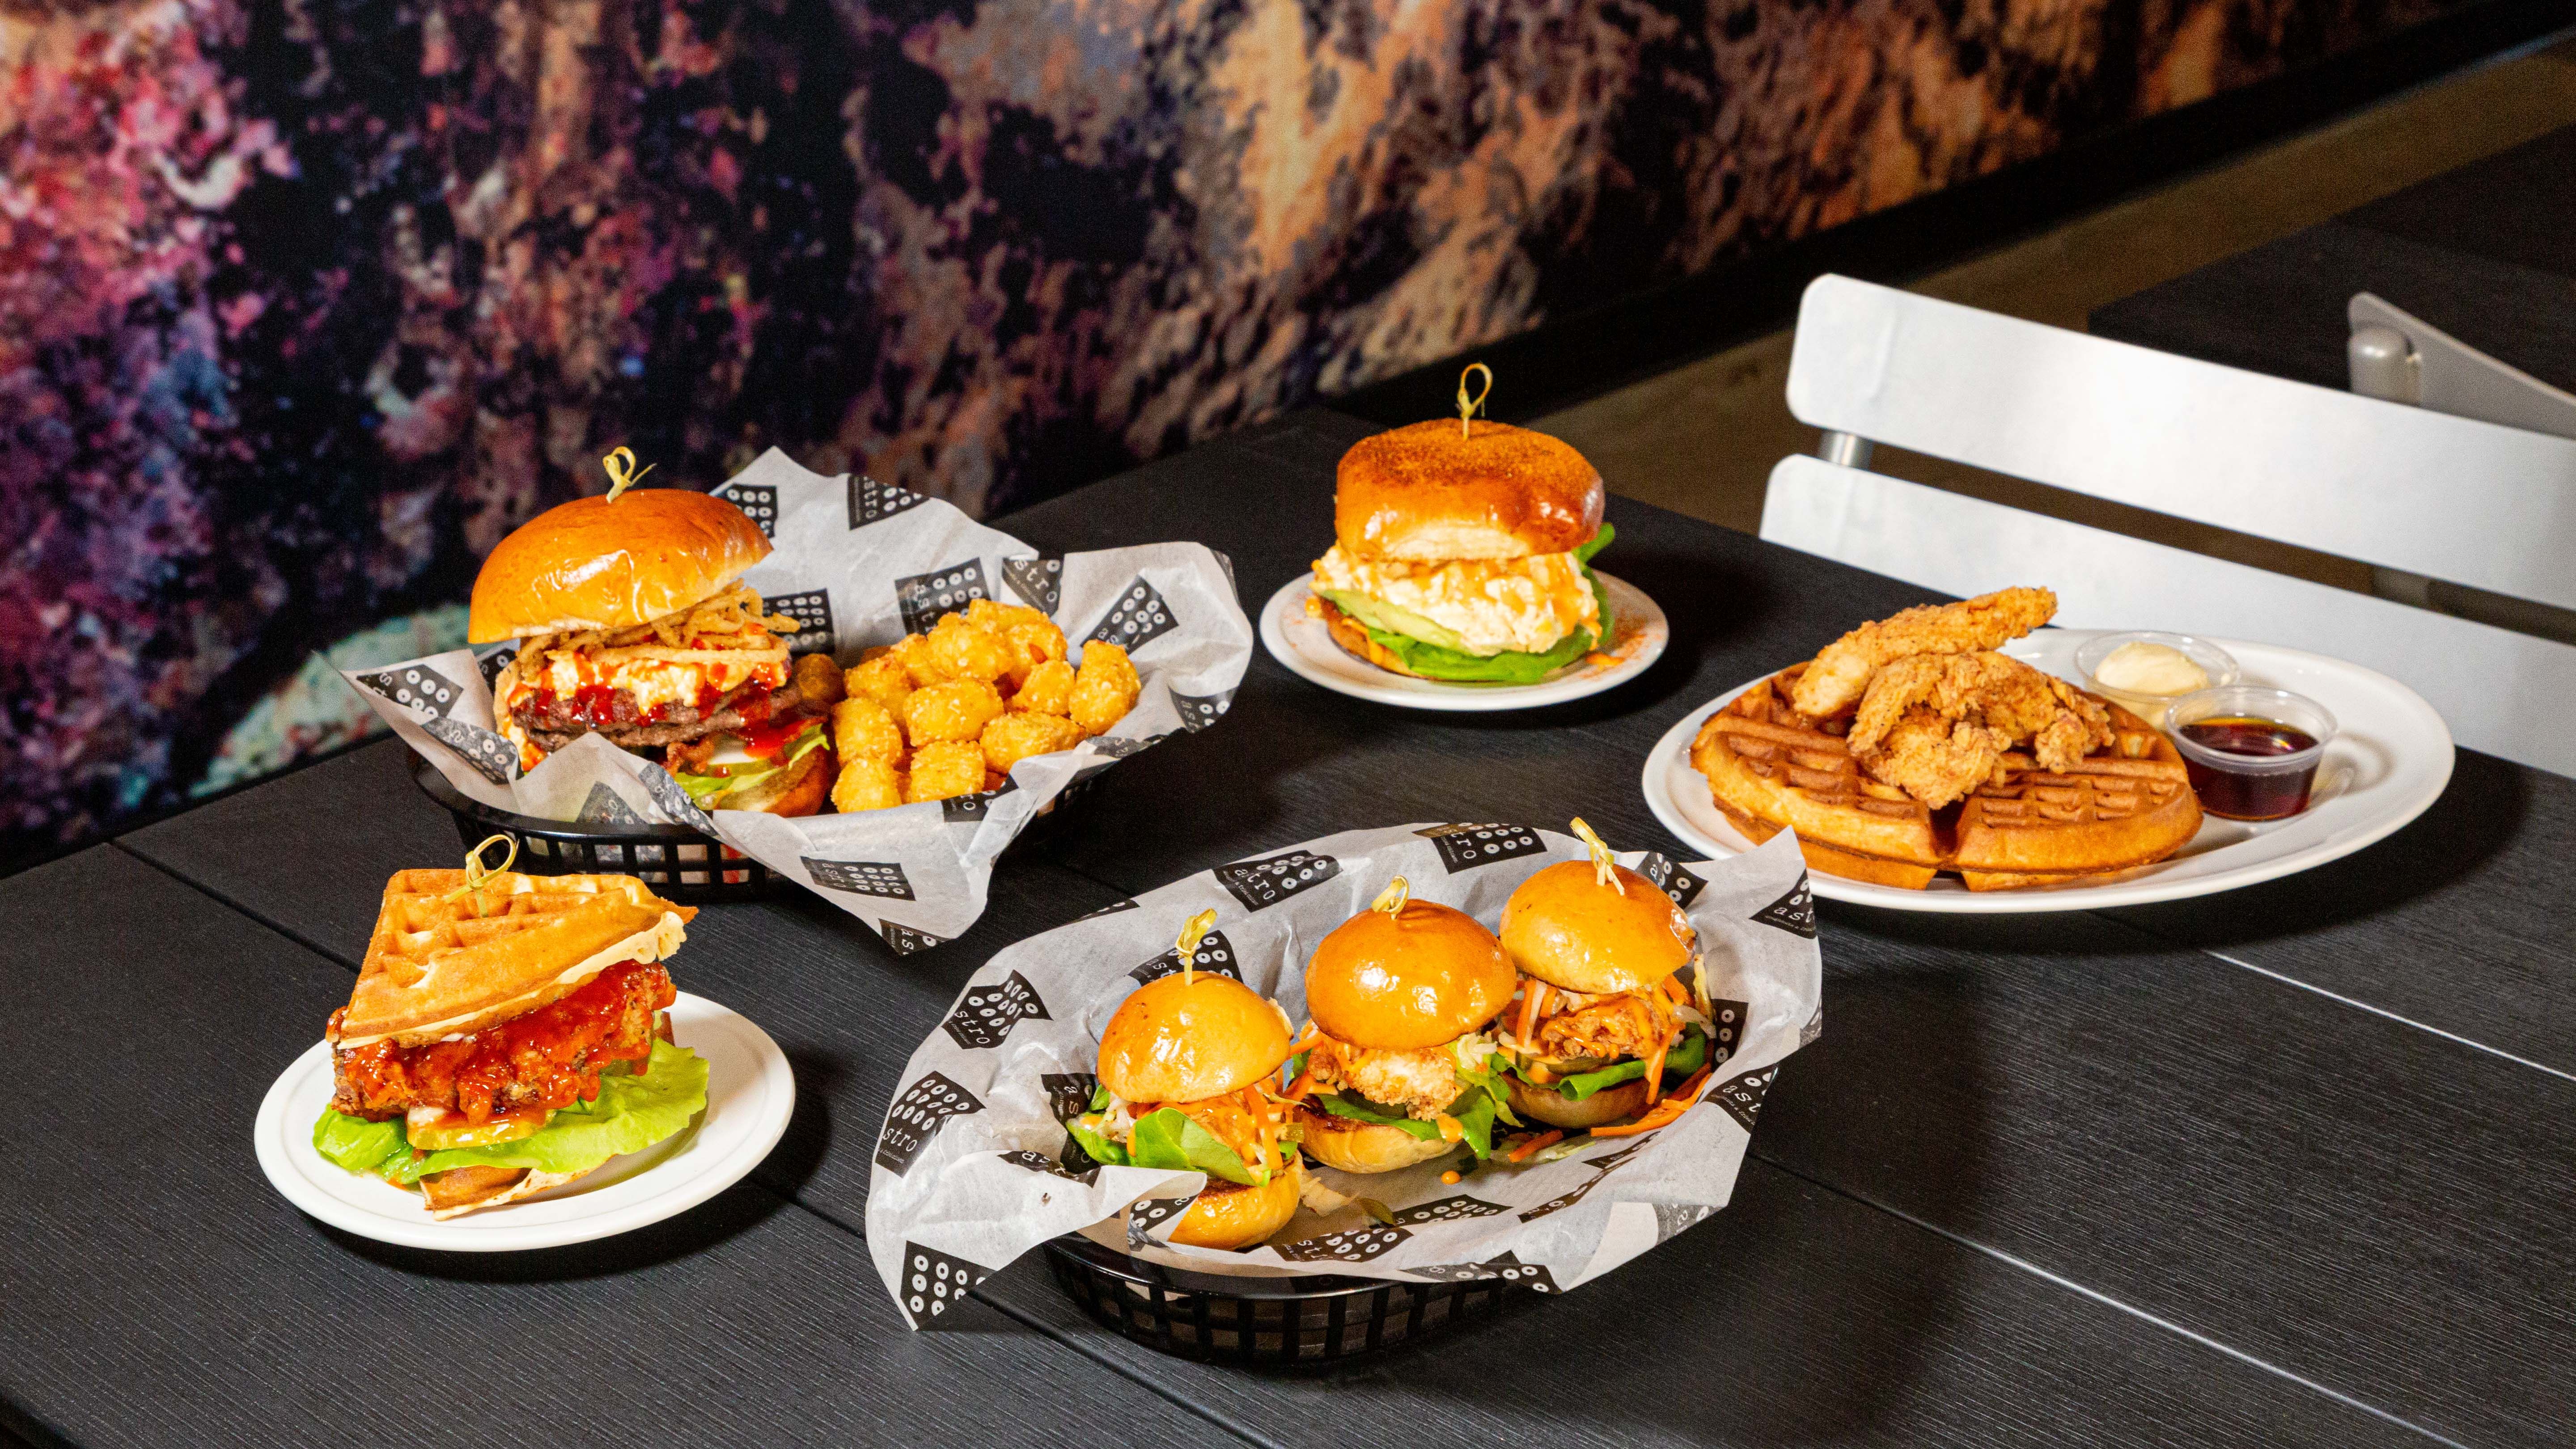 A table heaped with fried chicken sandwiches and sliders.